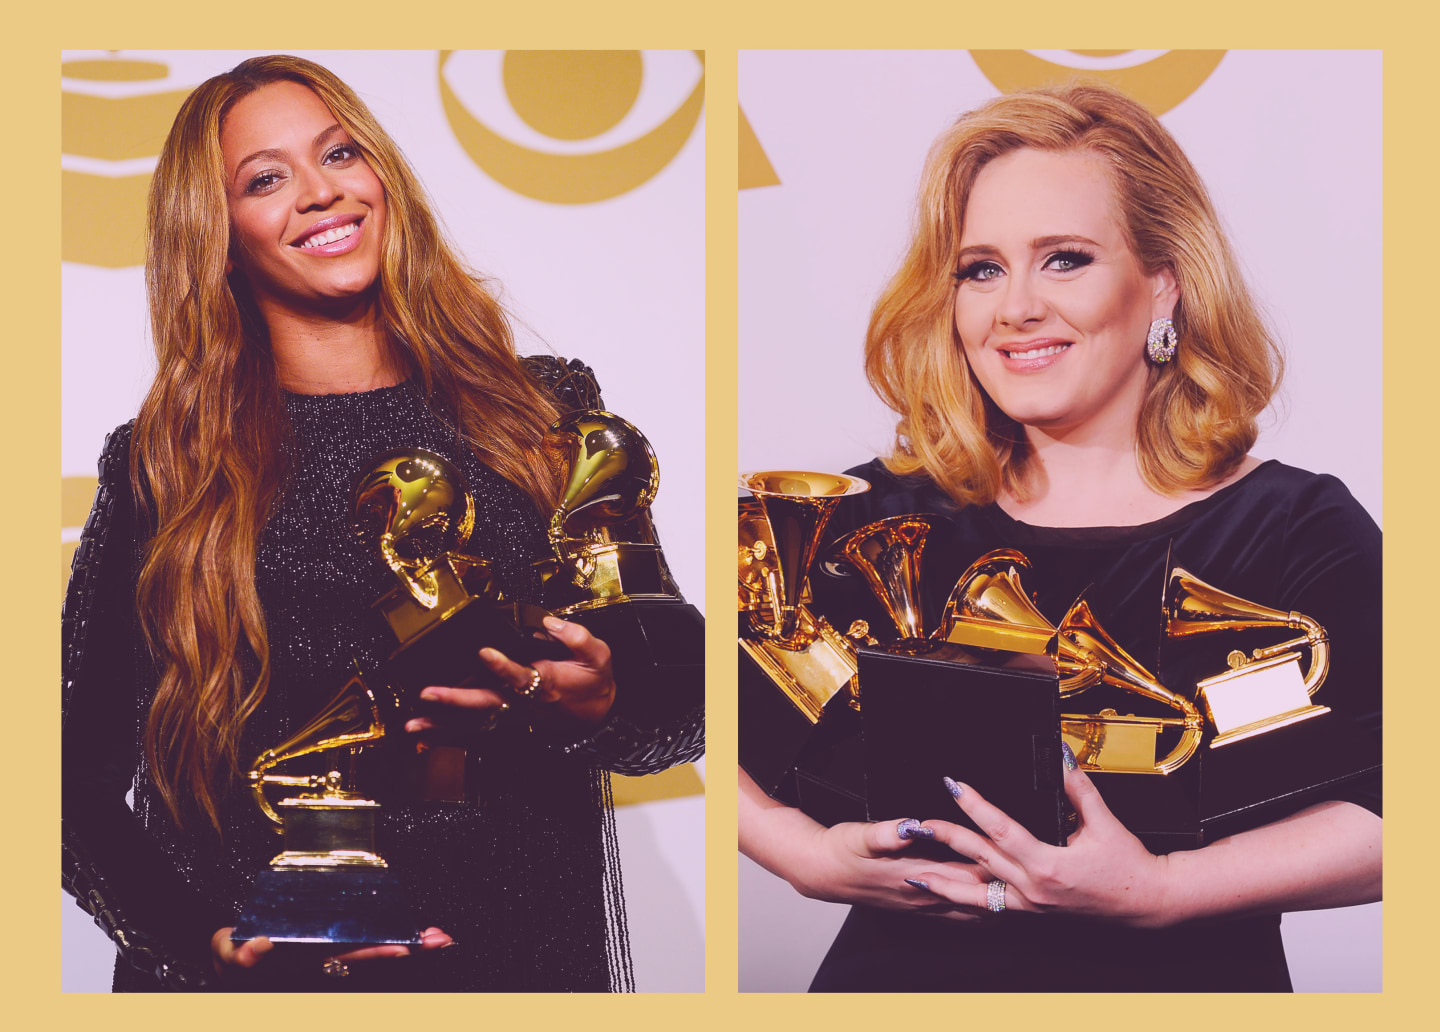 There Is No Beyoncé Vs. Adele Grammys Face-off. They Will Both Conquer.